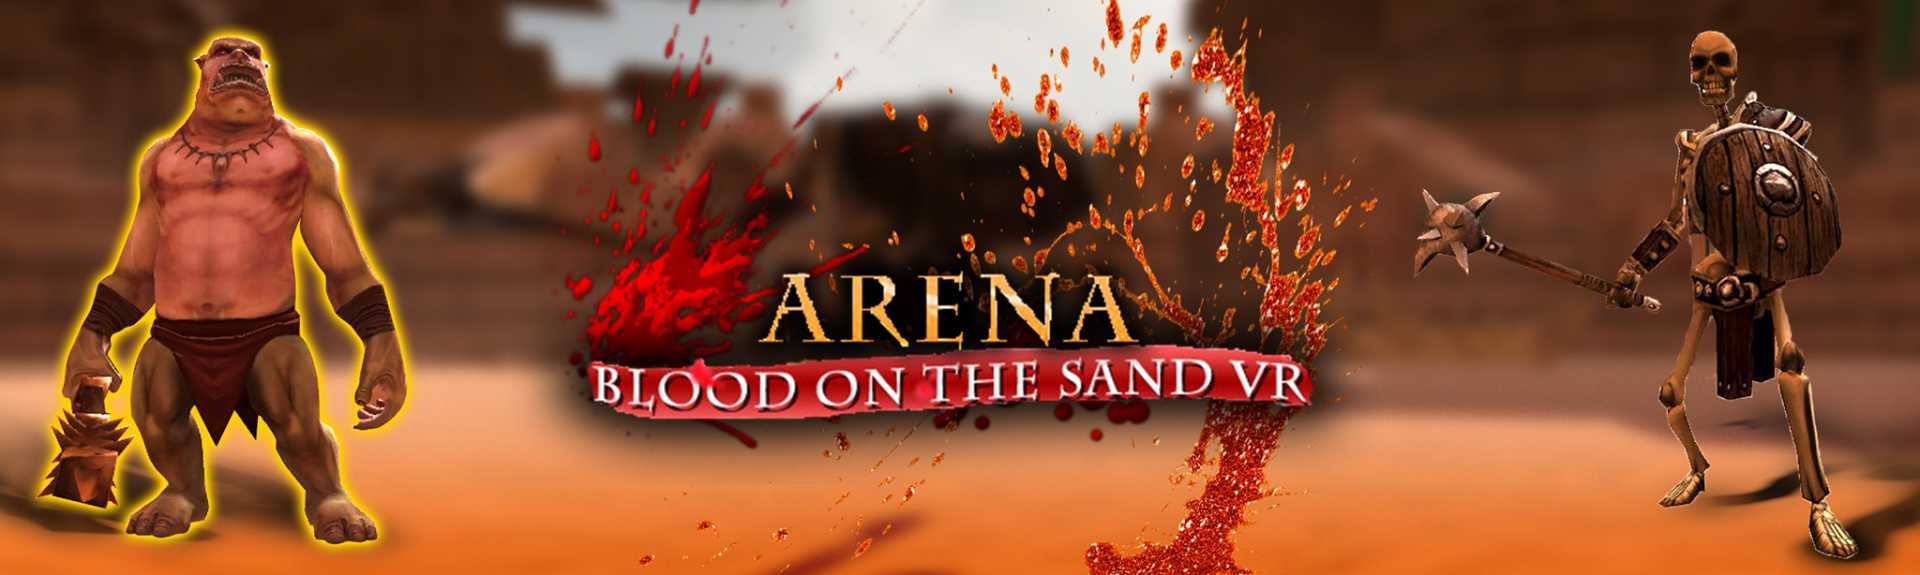 Arena Blood On the Sand